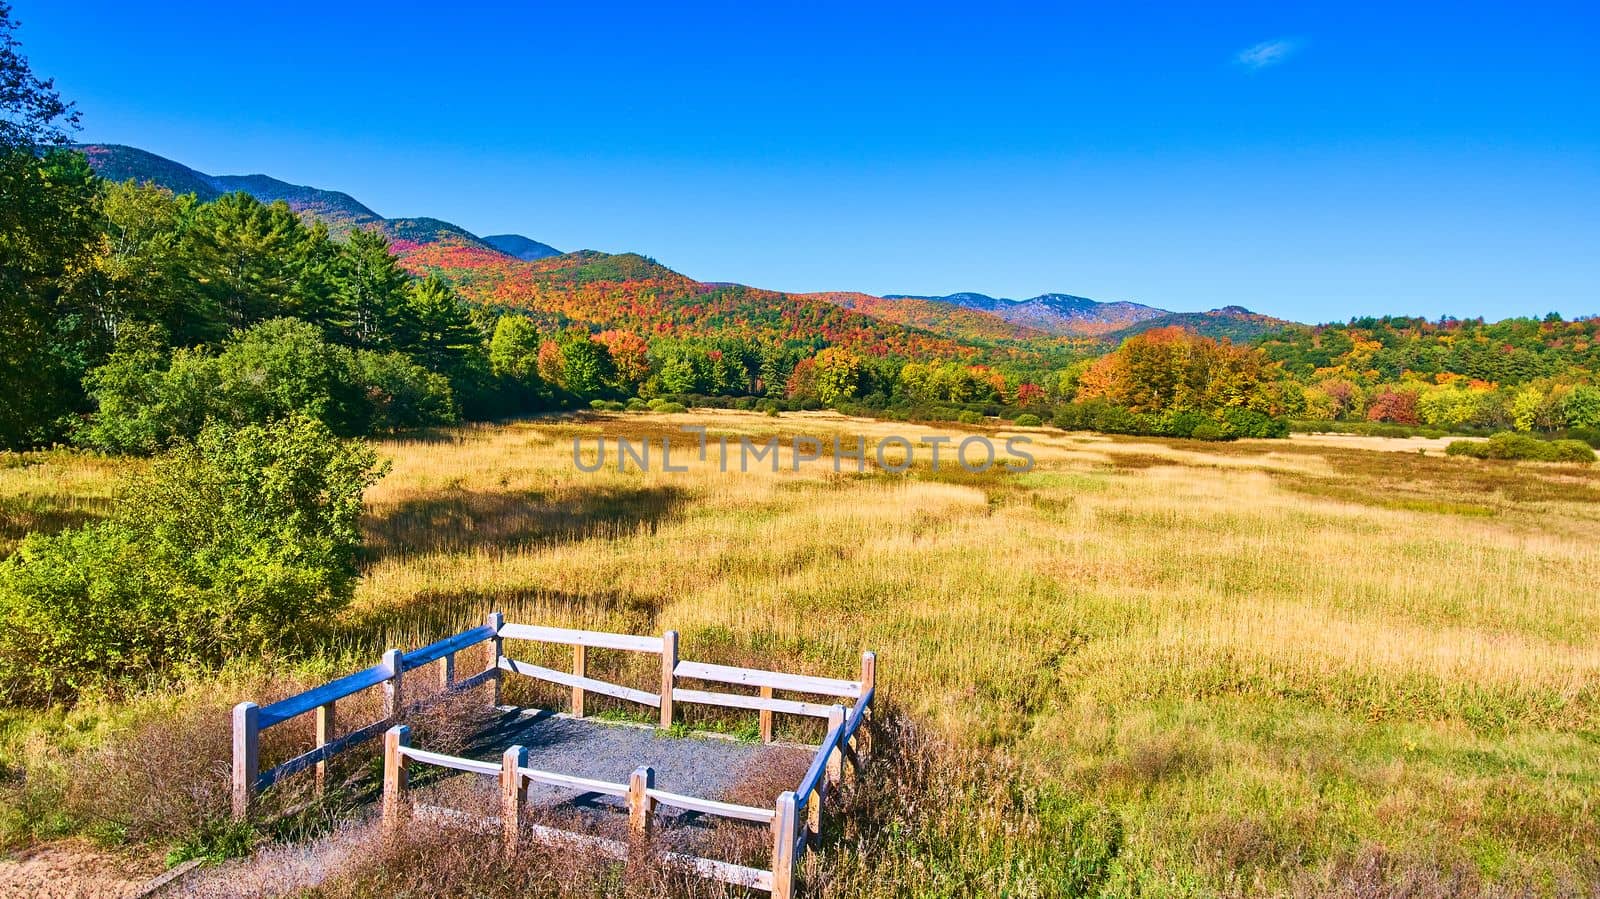 Image of View stunning fields and colorful mountains from small fenced platform